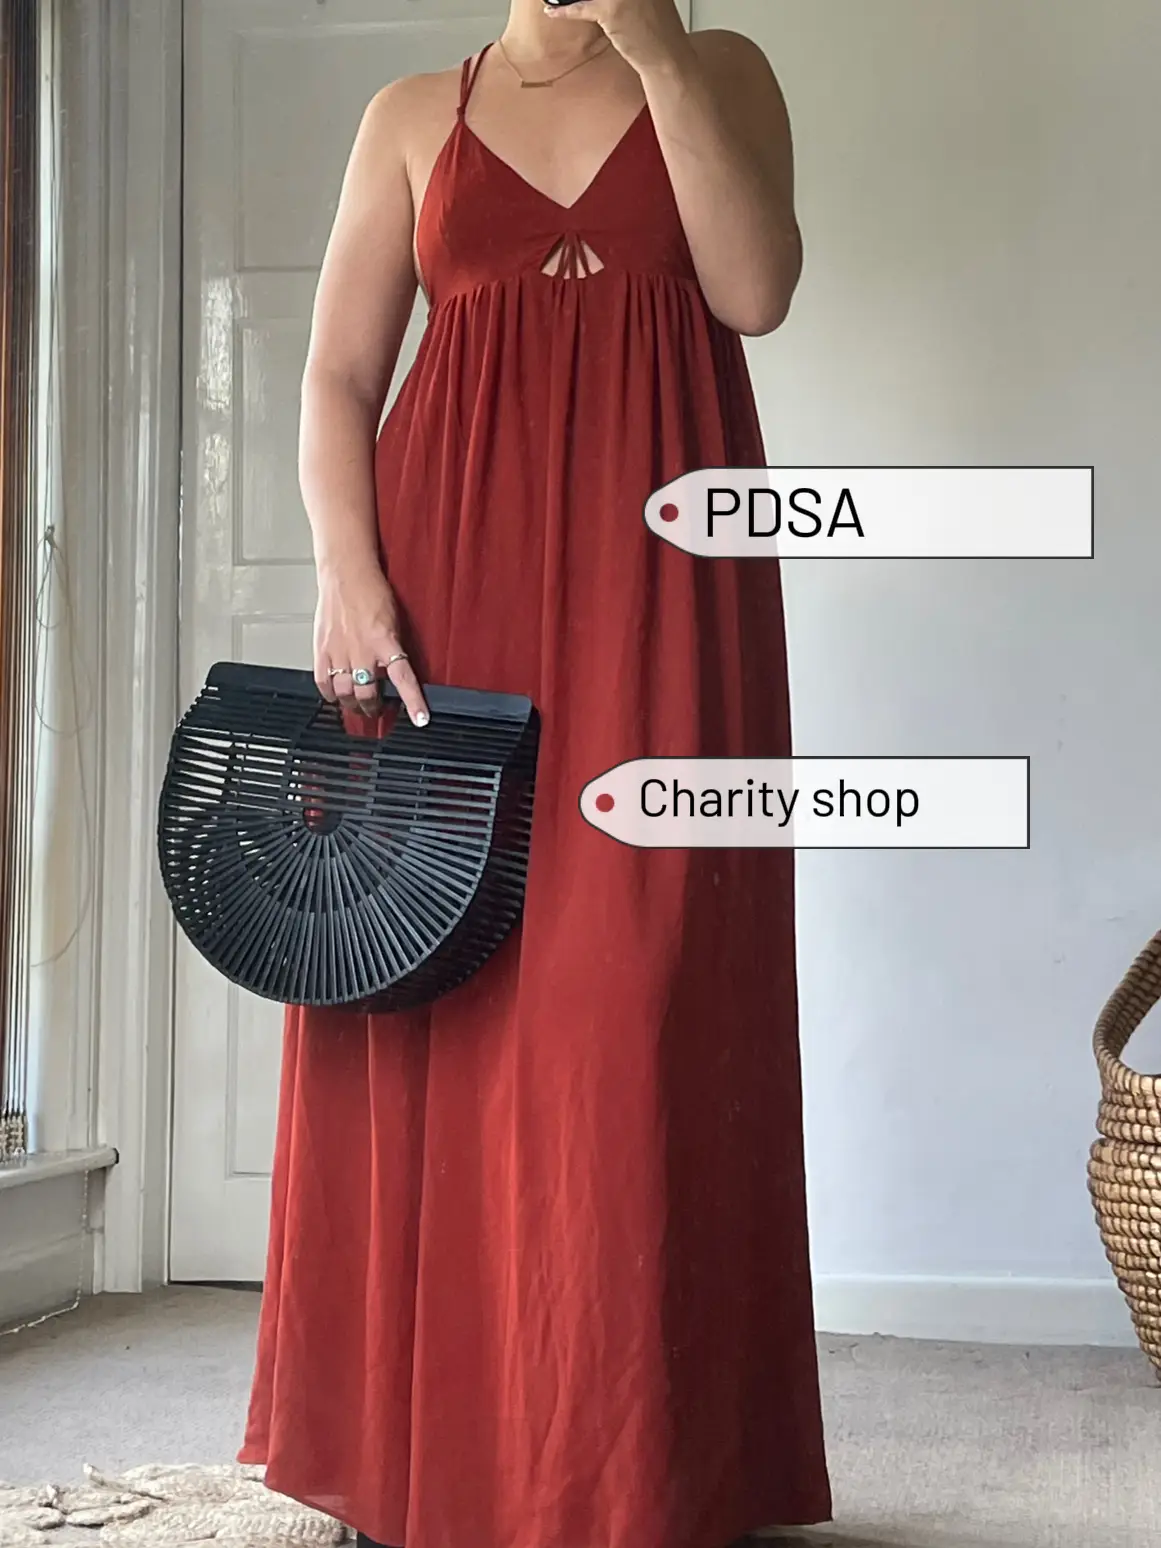 BERSHKA MAXI DRESS - PRODUCT REVIEW ✔️🩷🩰, Gallery posted by Yasmin Dodge